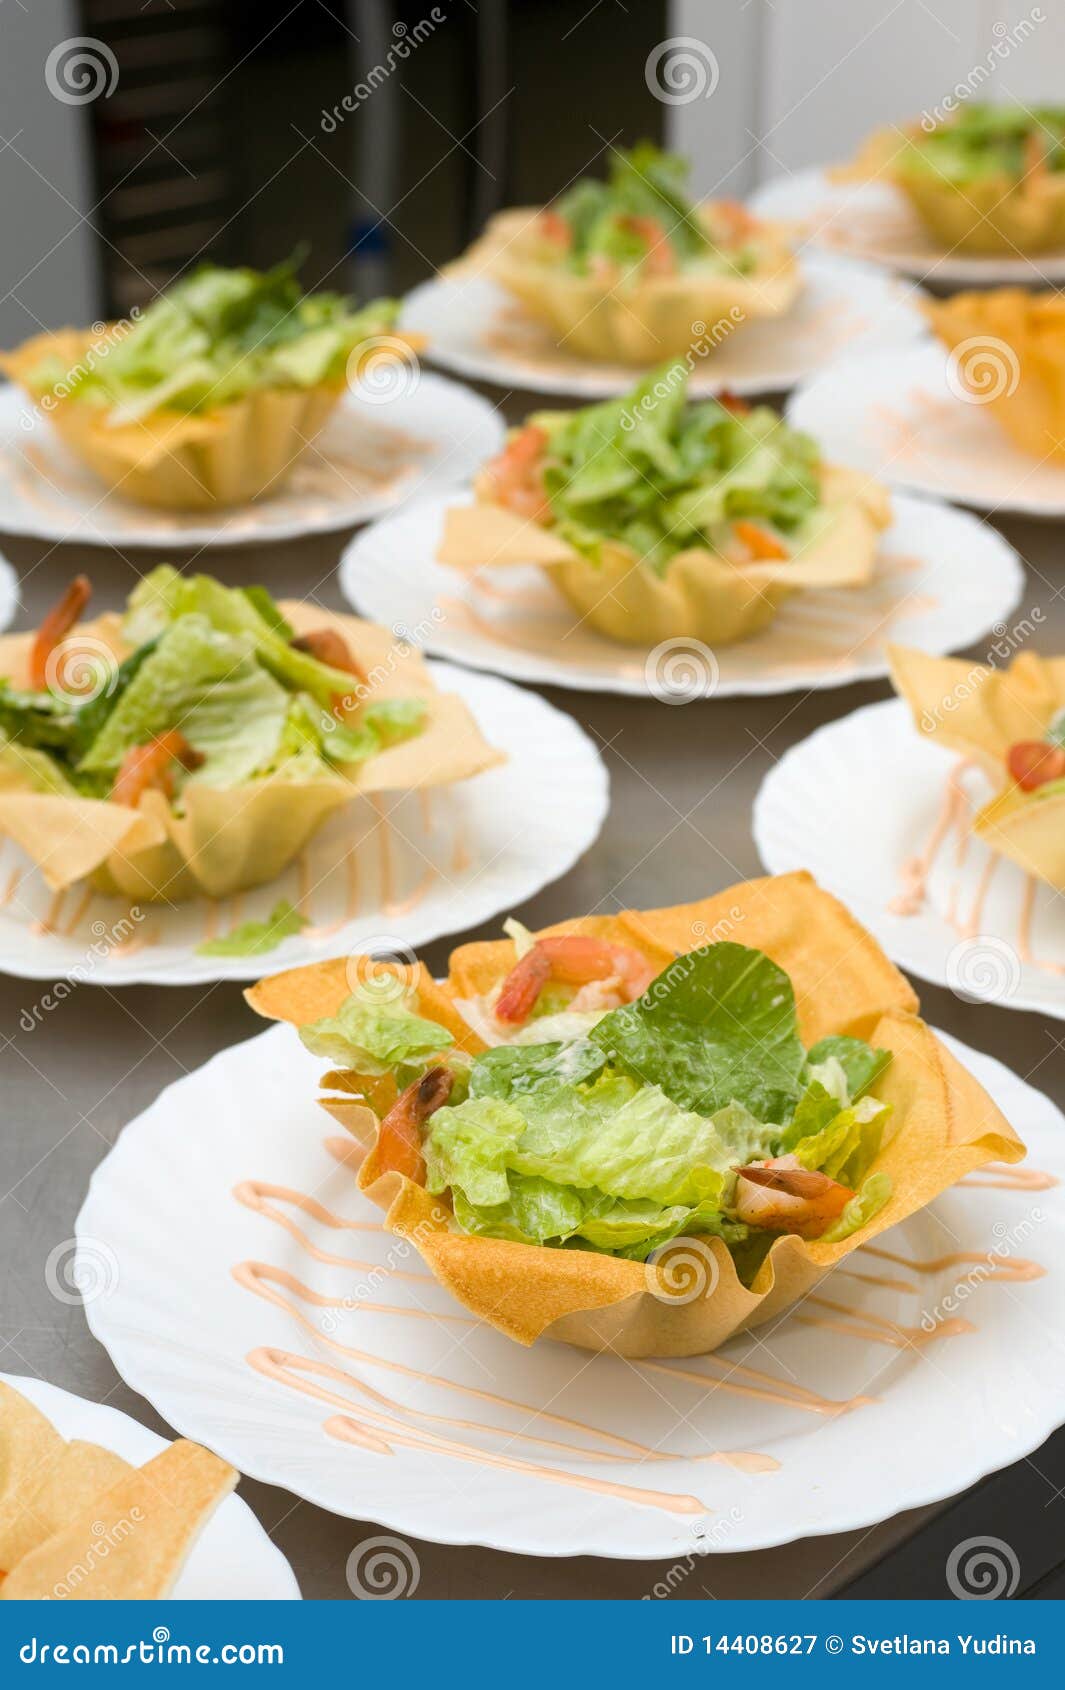 Download Salad With Shrimps In Bowls Stock Image Image Of Food Salad 14408627 Yellowimages Mockups